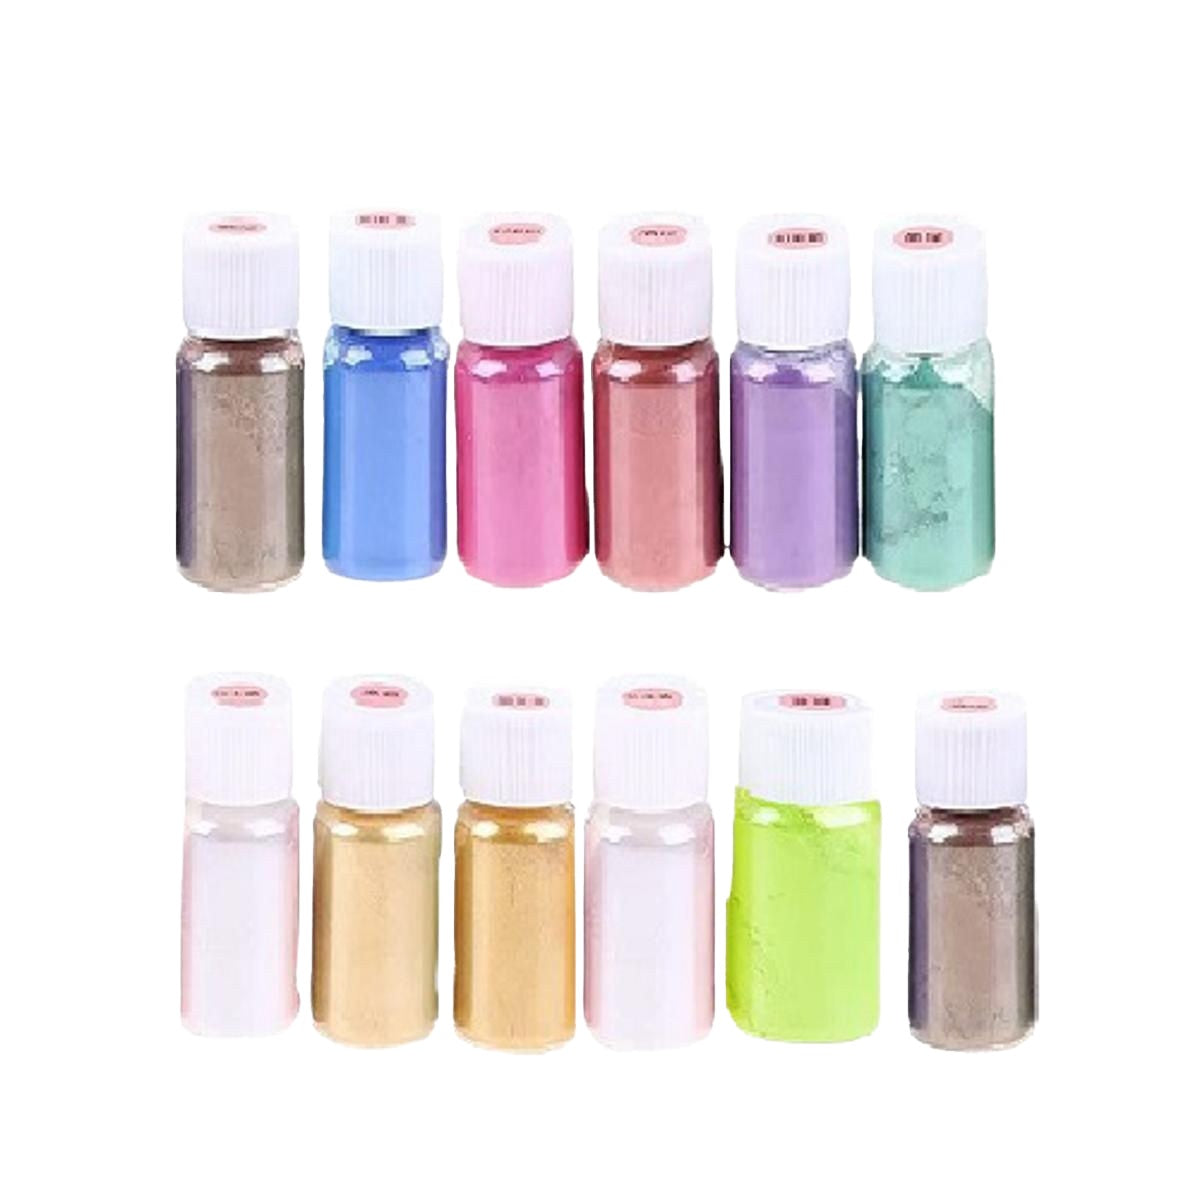 Pack of 12 - Mica Powder Pigments, Epoxy Resin Powder Pigments, Glittered Color Pigments For Jewelry Making, Epoxy Resin